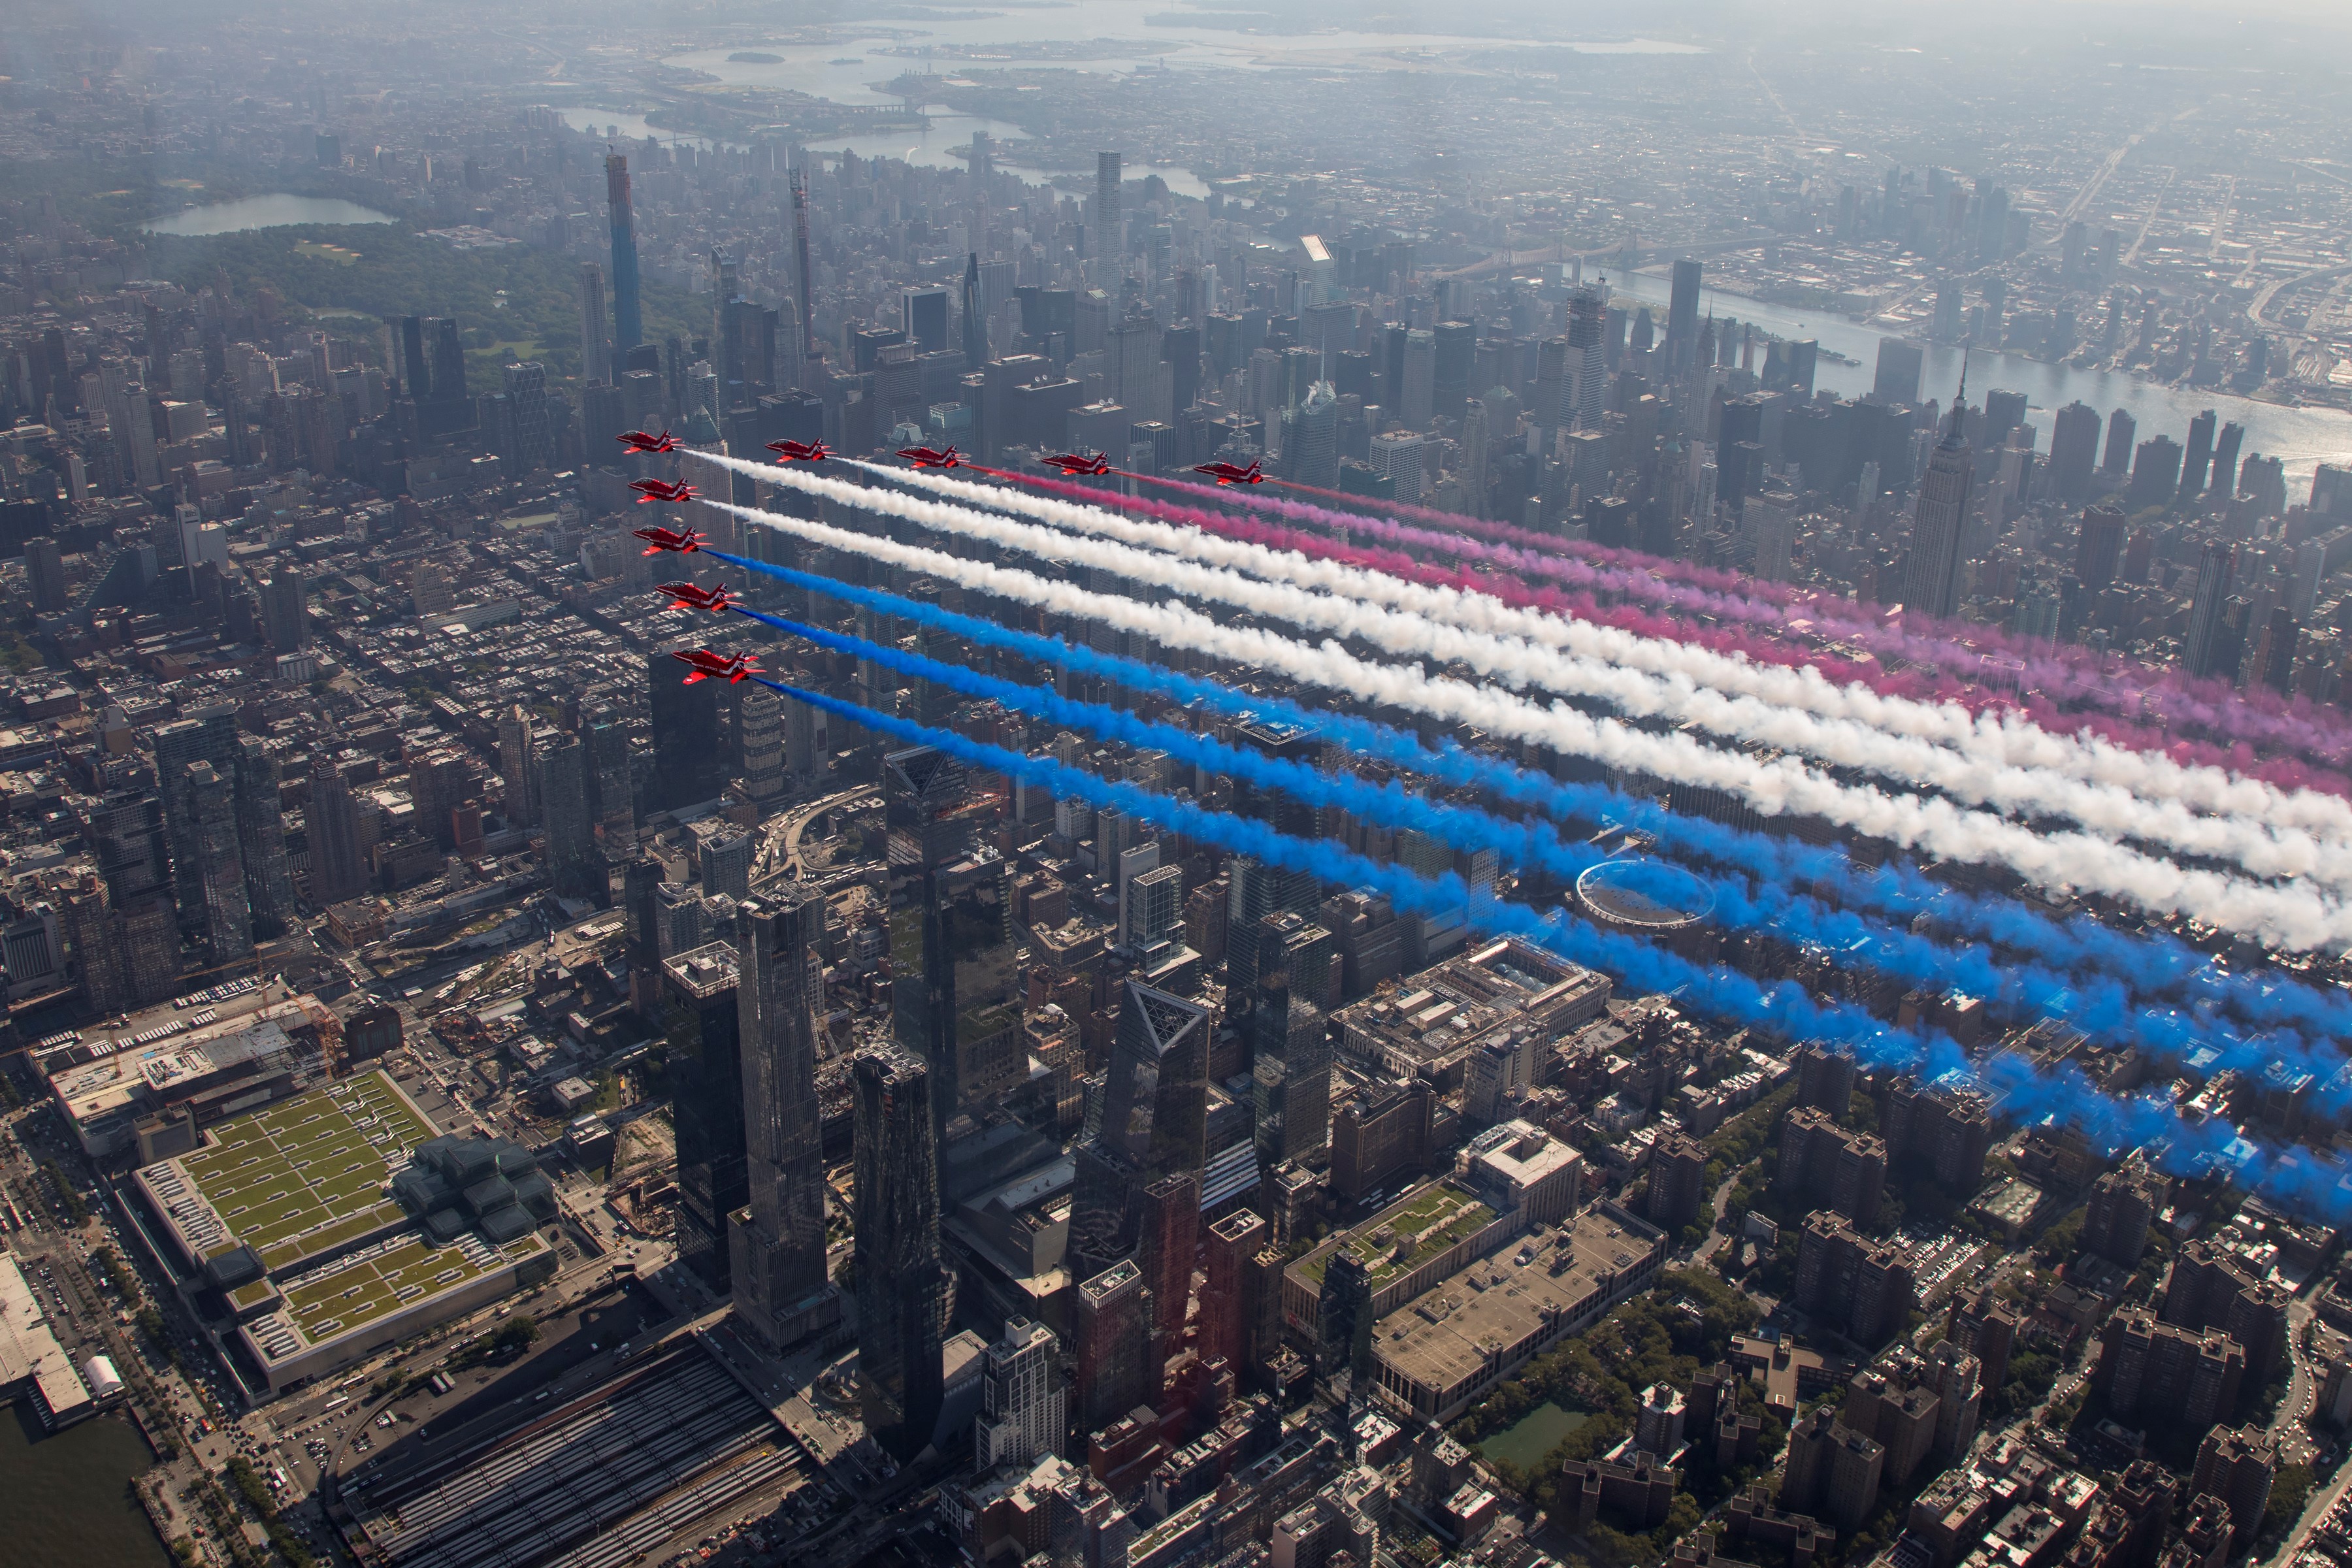 The Red Arrows over New York - one of the highlights of Squadron Leader Gregor Ogston's time with the team.